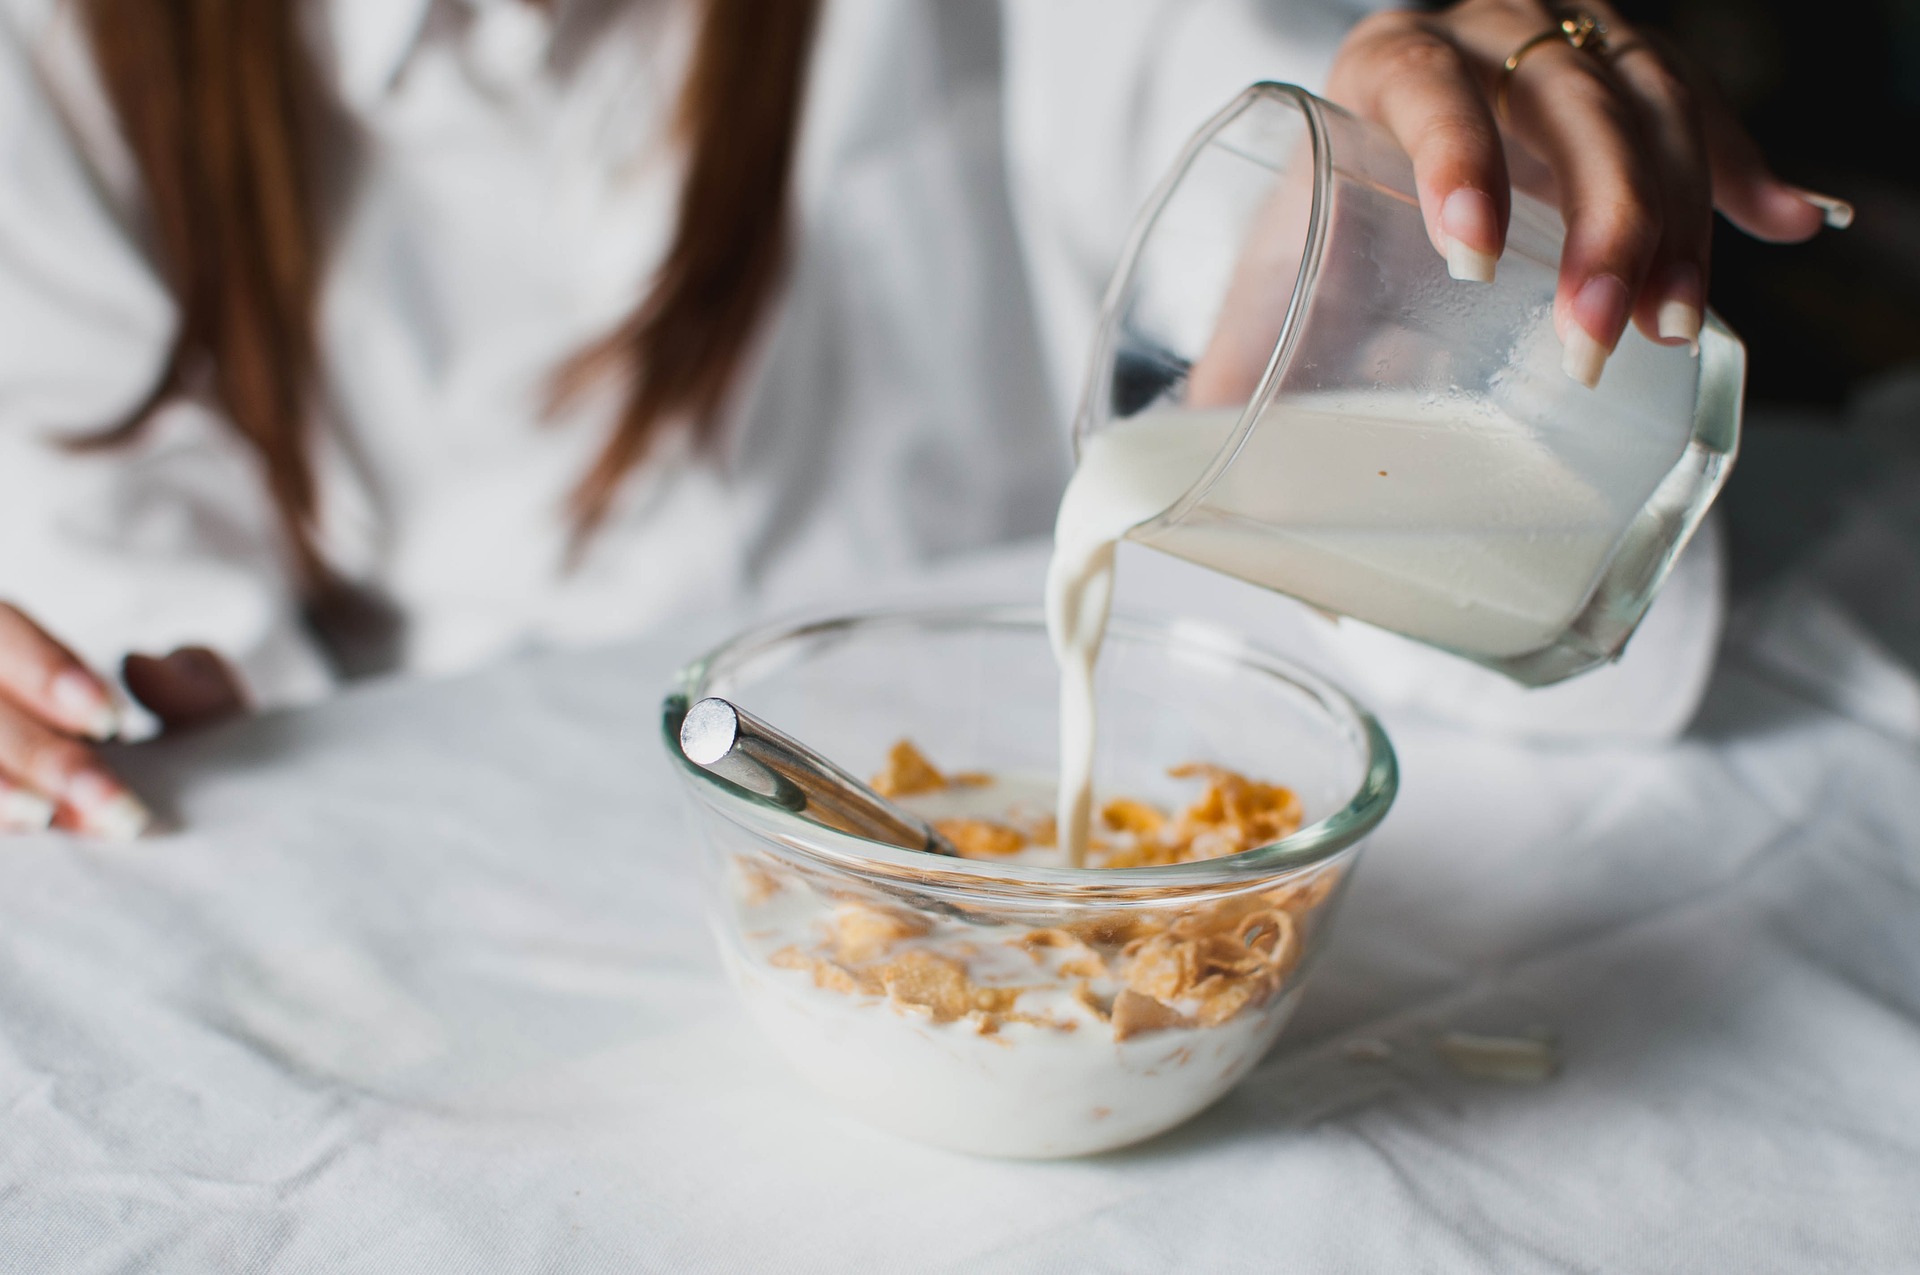 A woman prepares a bowl of cereal with milk for breakfast.